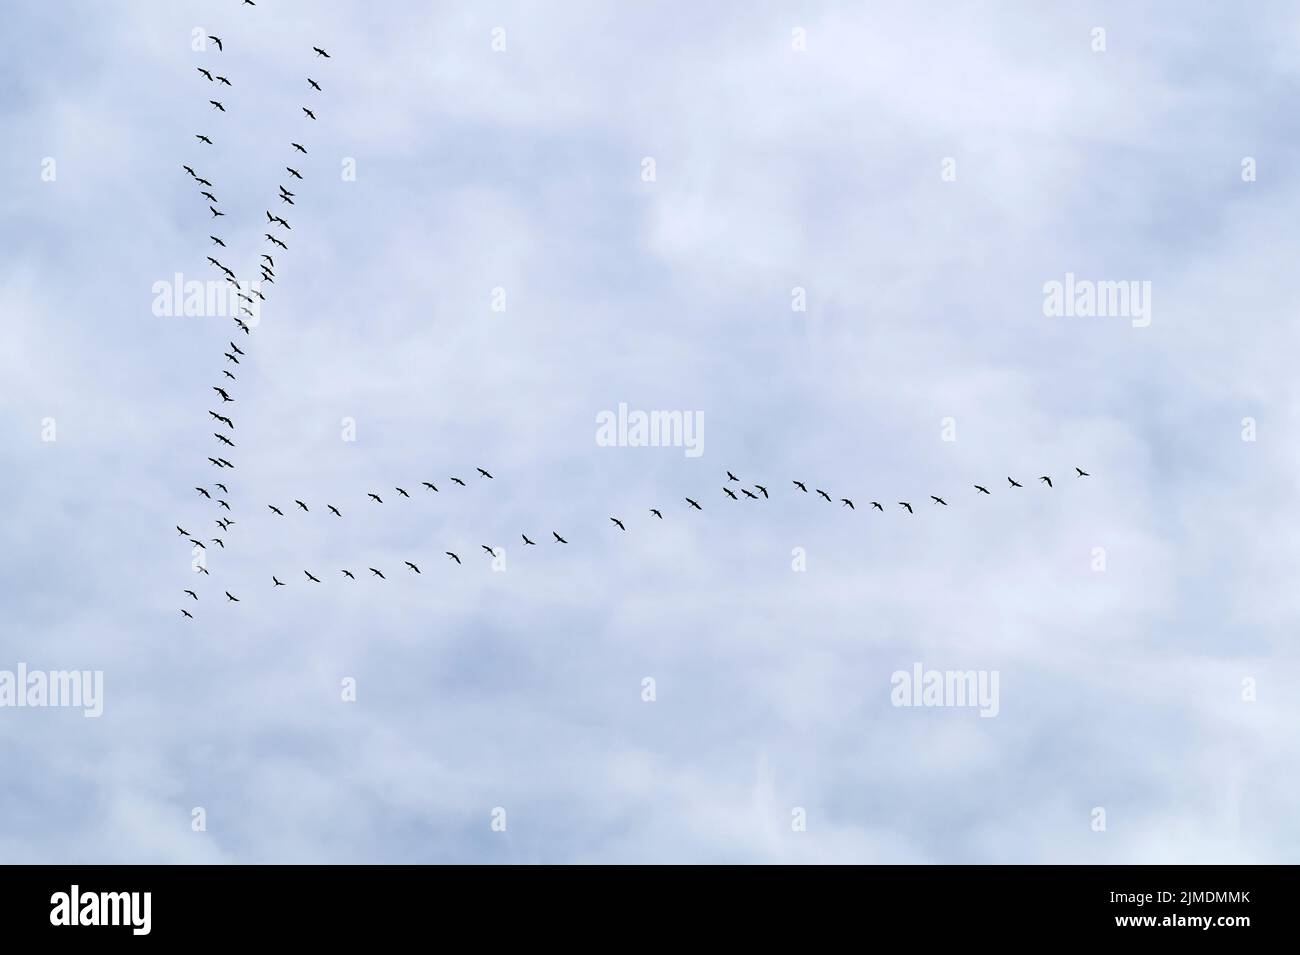 Common cranes in flight formation at passage of birds. Annual fall migration. Stock Photo